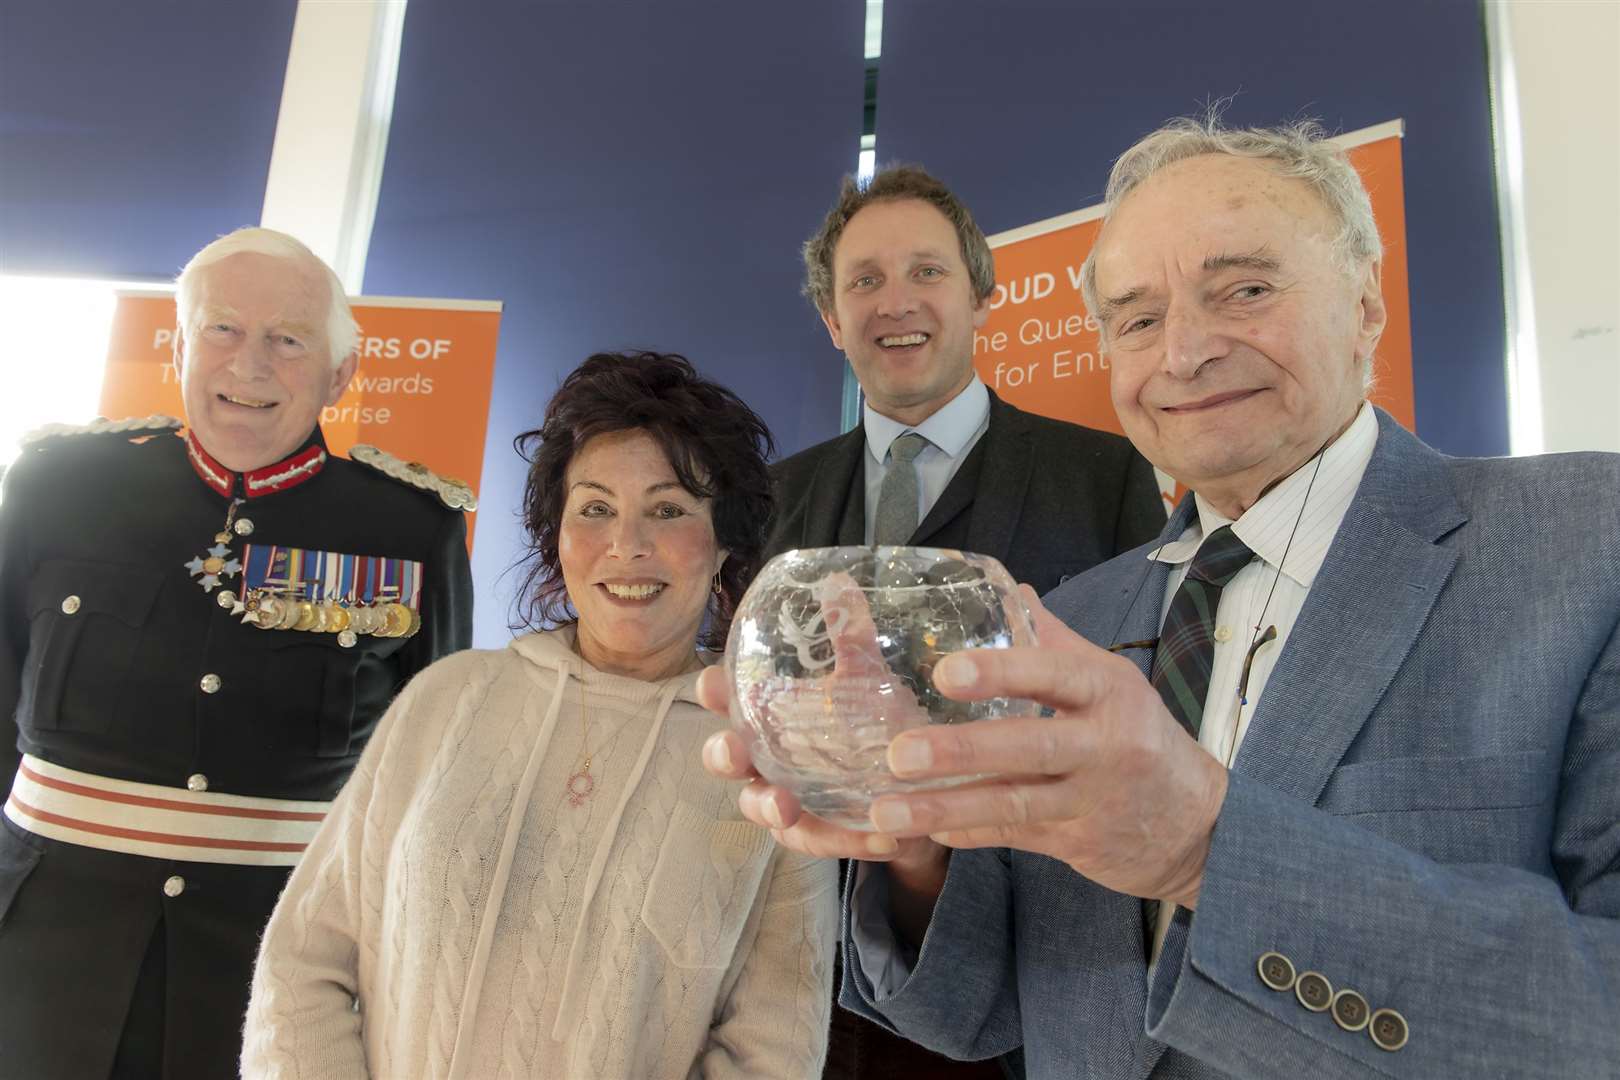 Lord-Lieutenant Seymour Monro, friend of AES Solar Ruby Wax, director Campbell MacLennan and managing director George Goudsmit.